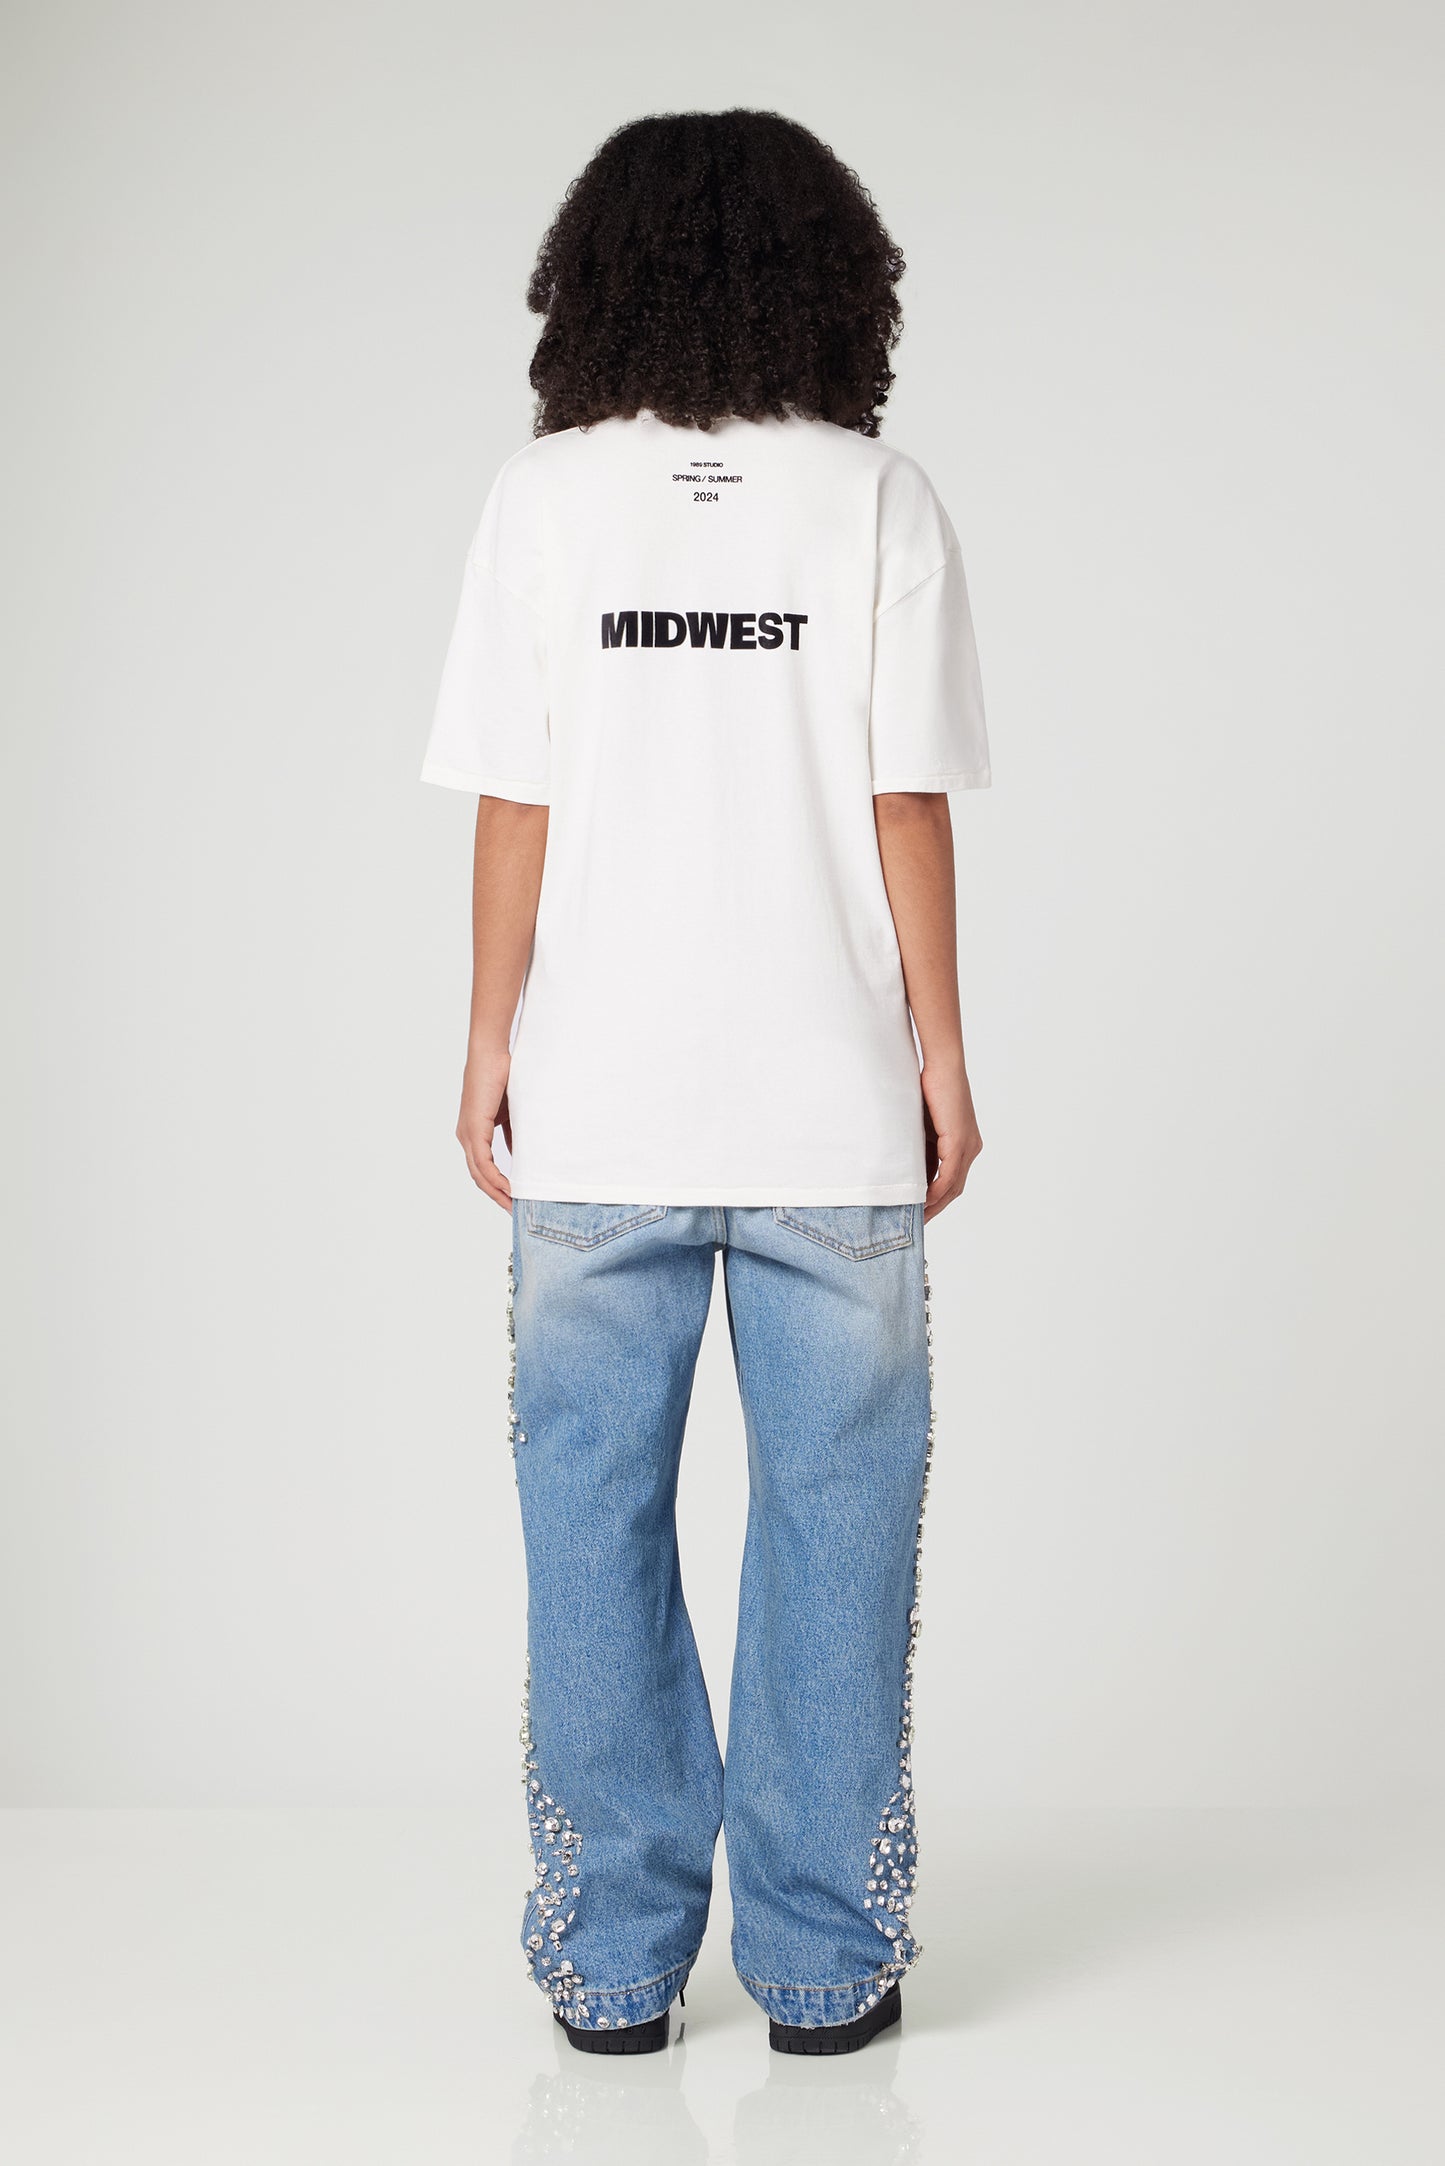 Woman's Midwest T-Shirt